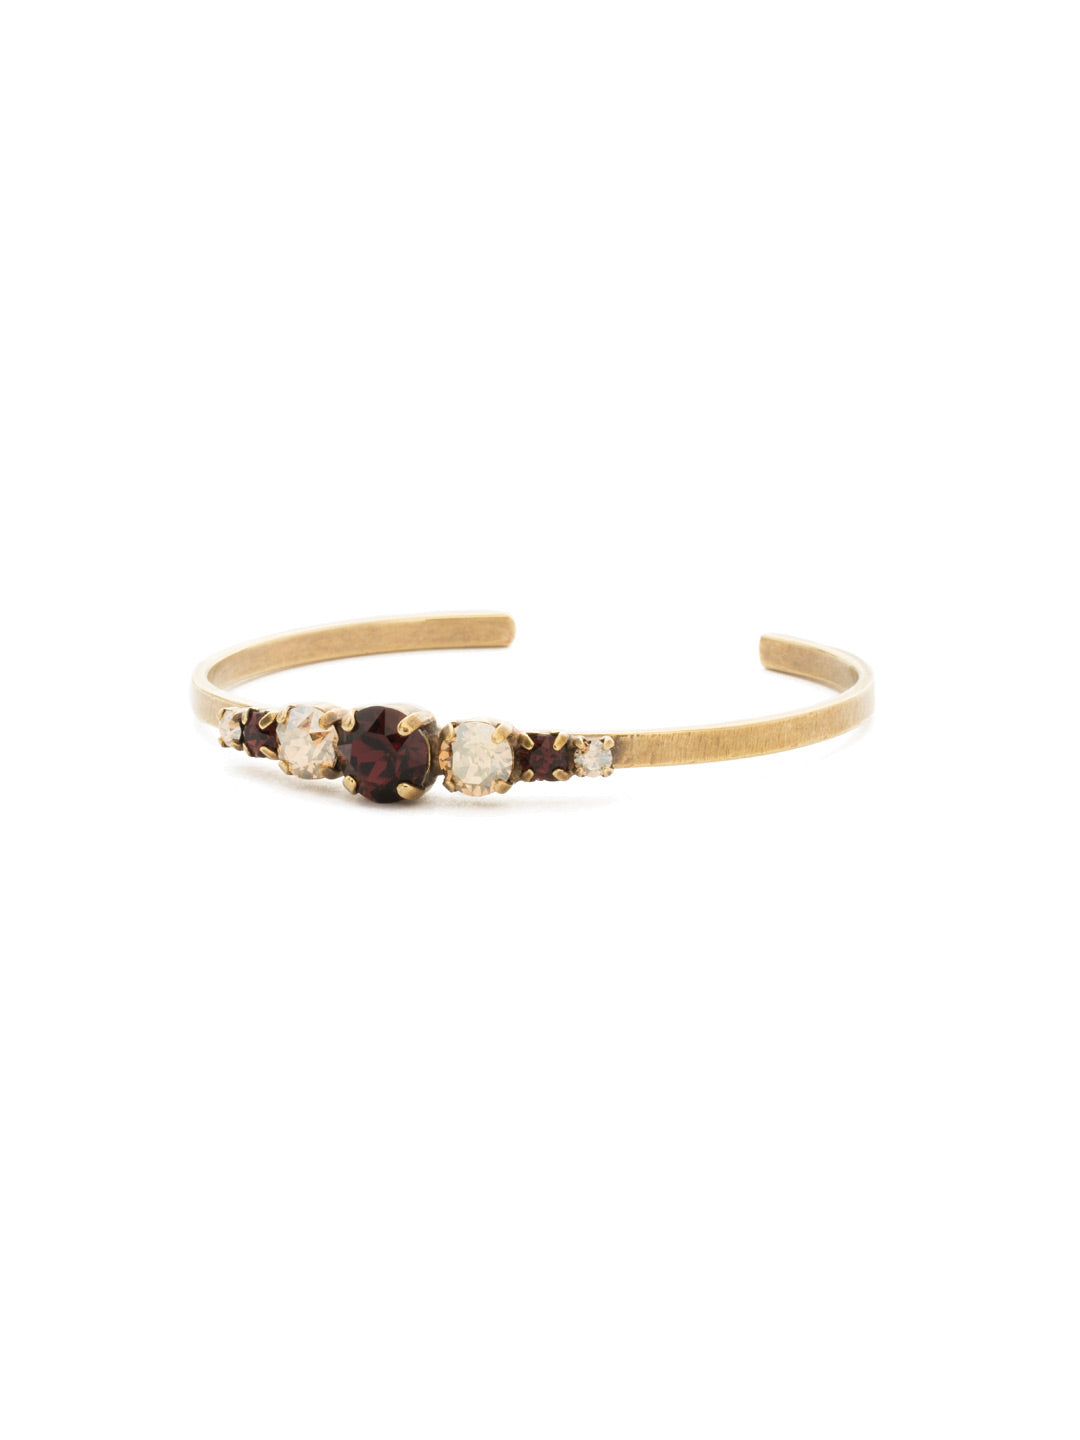 Petite Round Crystal Cuff Bracelet - BDA14AGMMA - <p>This petite cuff combines crystal and metal elements to add the perfect touch of sparkle to your favorite arm party. From Sorrelli's Mighty Maroon collection in our Antique Gold-tone finish.</p>